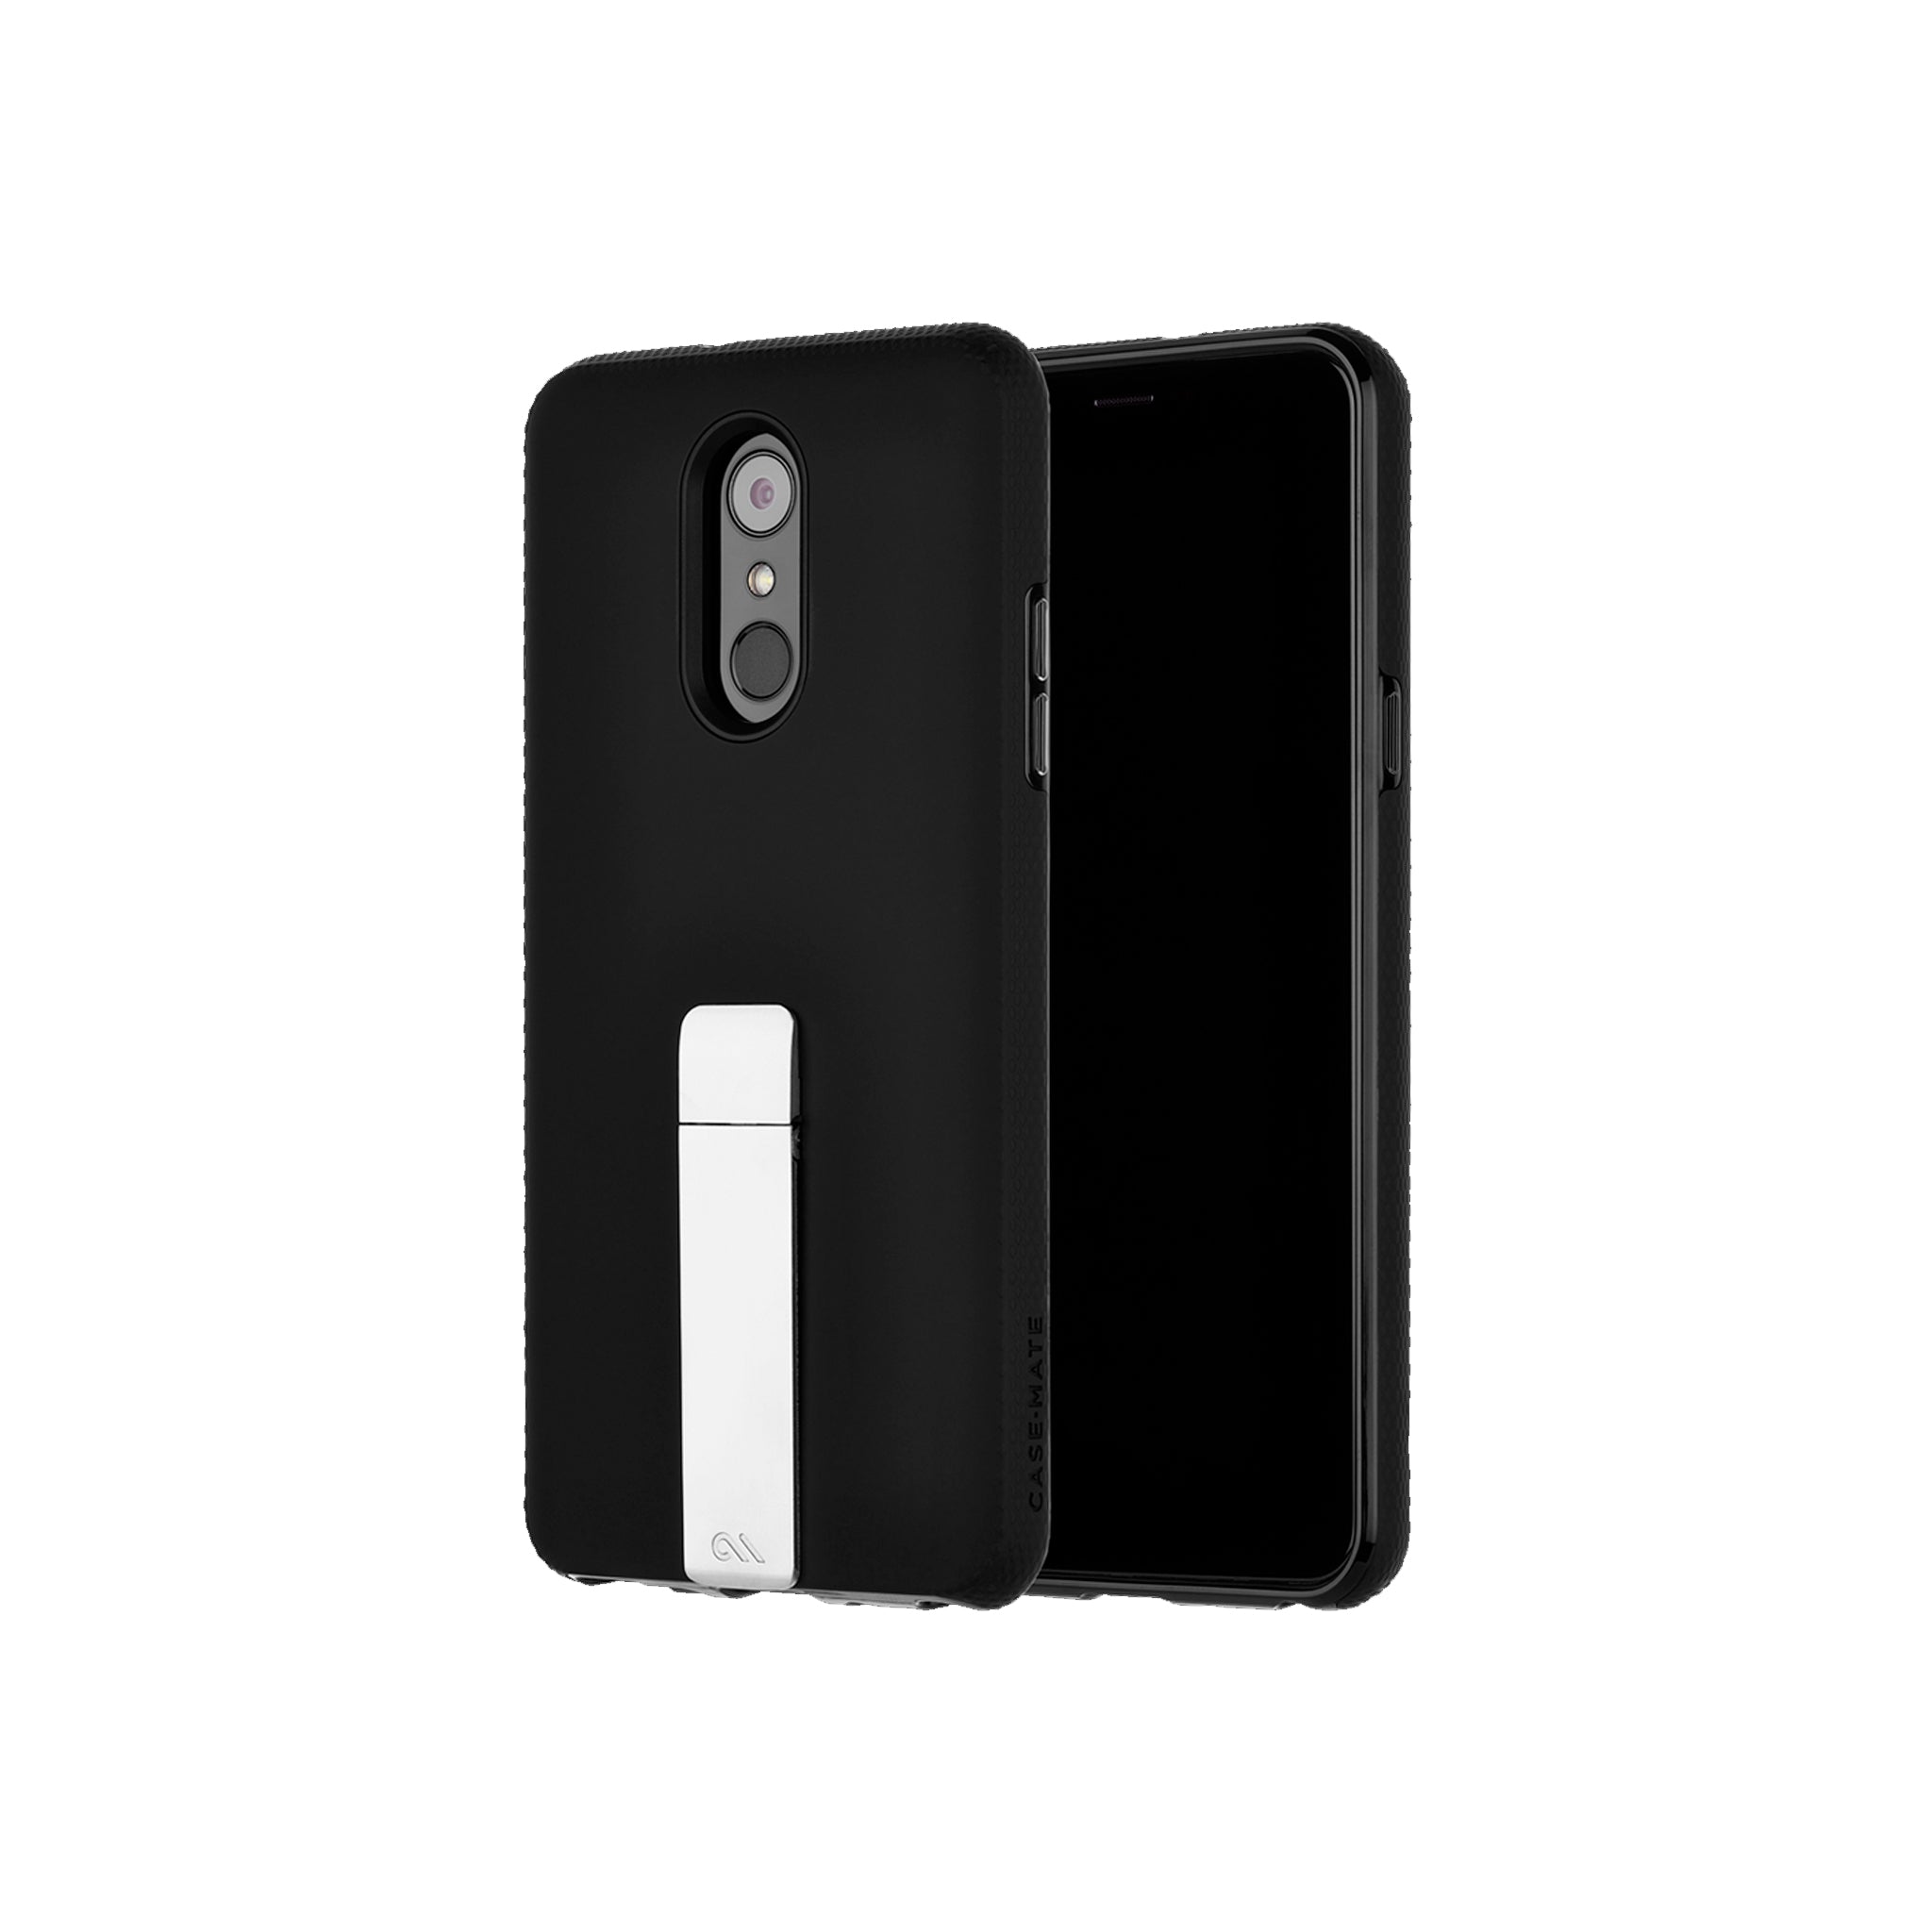 Case-mate - Tough Stand Case For Lg Stylo 5 - Black